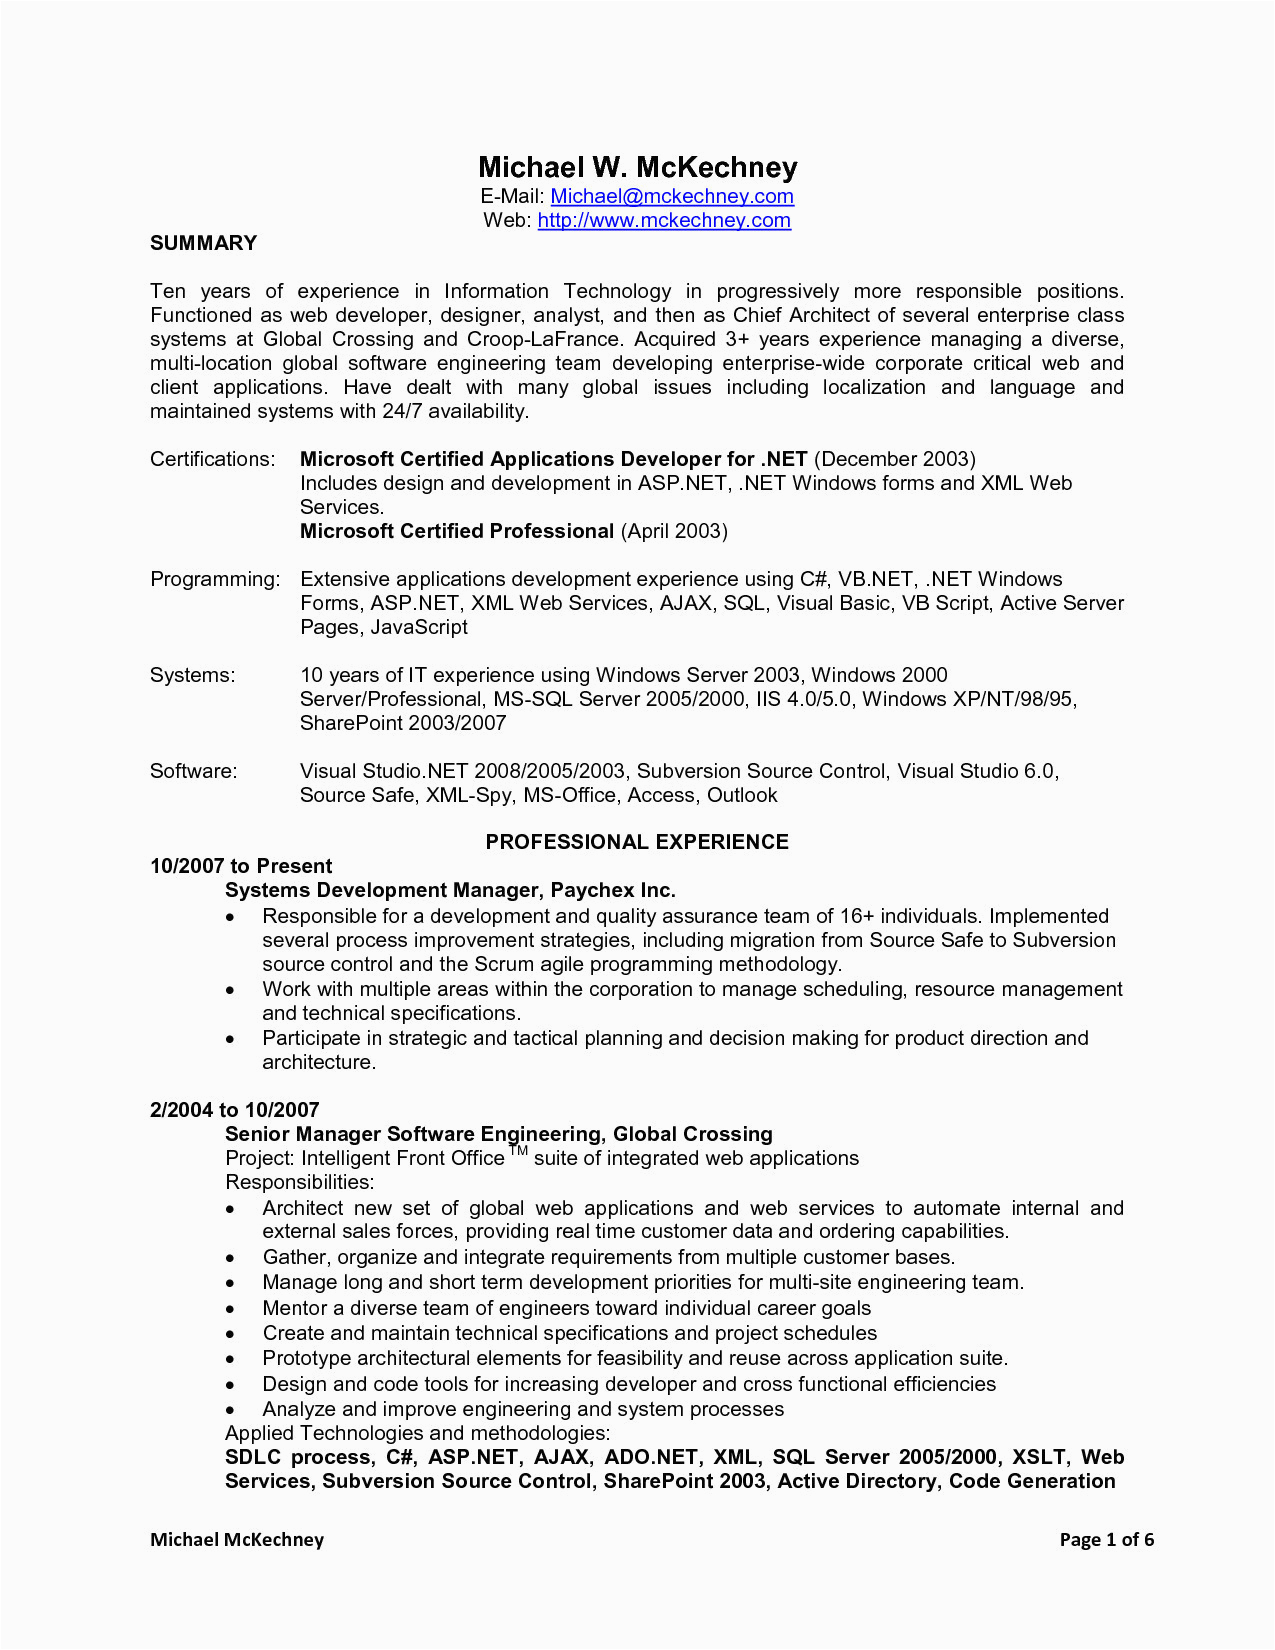 Sample Resume for 4 Years Experience Resume format 4 Years Experience Resume format